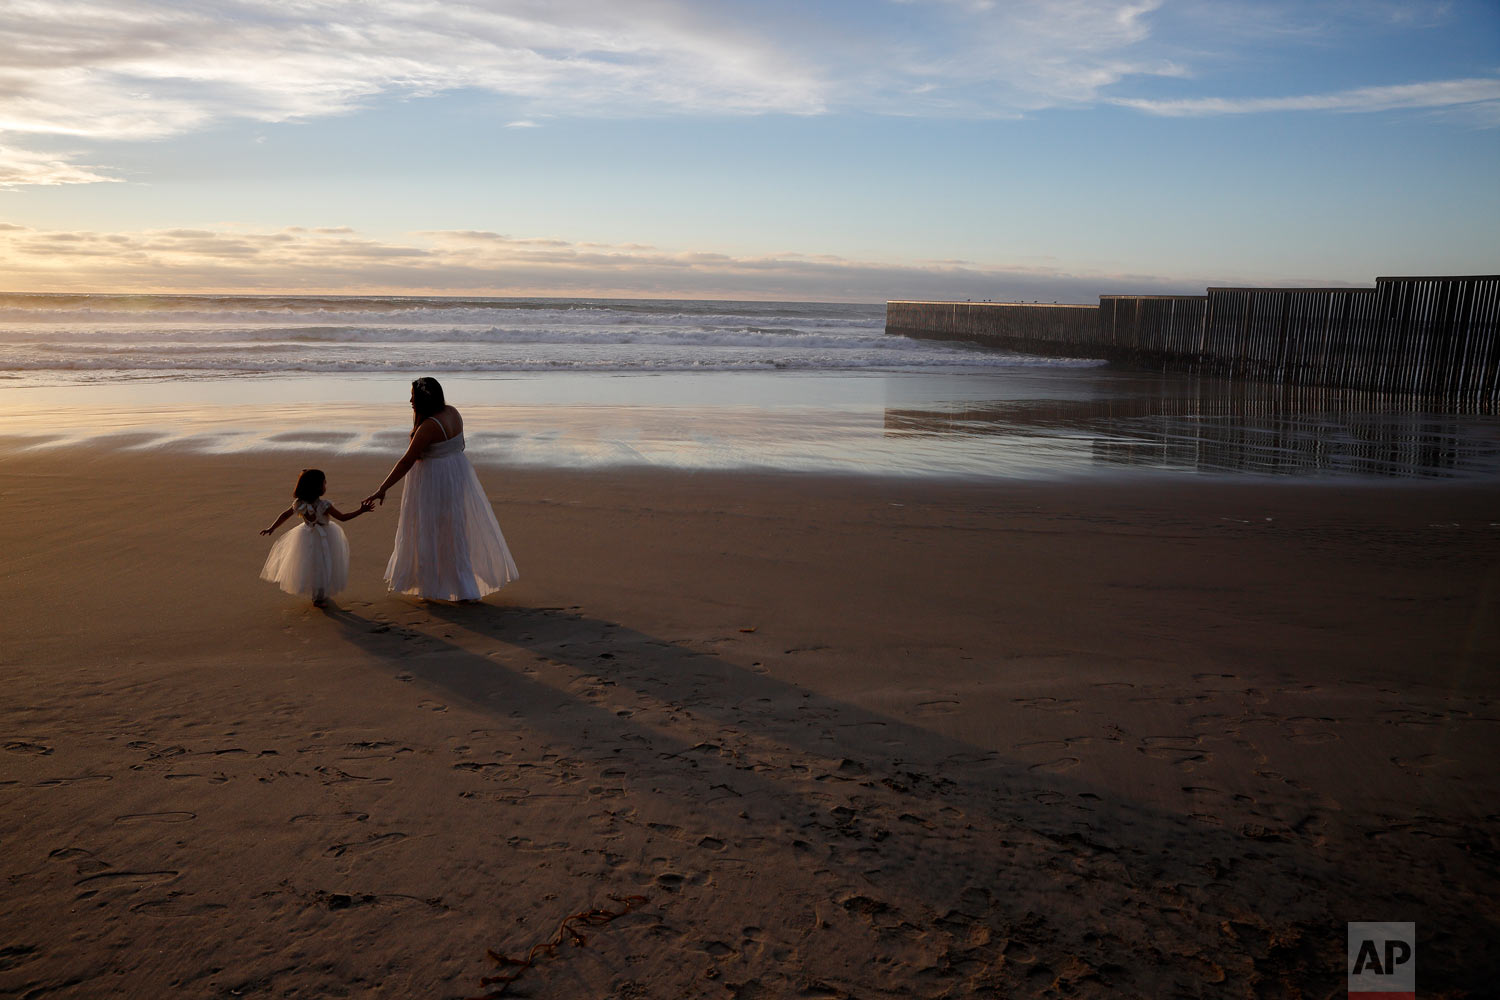  Ileze Dariel, of Tijuana, Mexico, reaches for the hand of her daughter Jimena as they wait for a photographer while taking family pictures on the beach next to the border wall, right, Jan. 9, 2019, in Tijuana, Mexico. (AP Photo/Gregory Bull) 